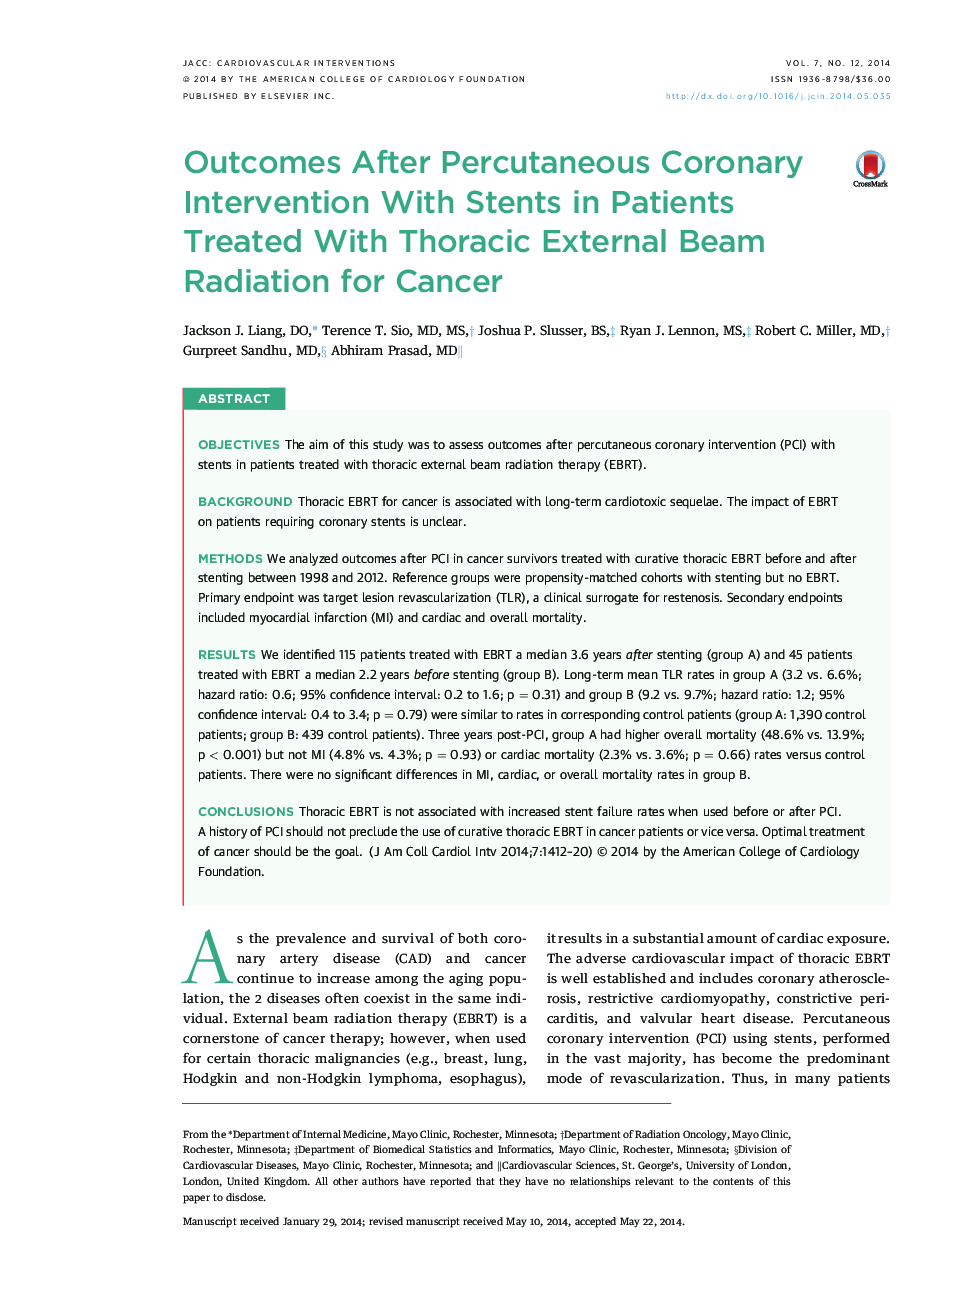 Outcomes After Percutaneous Coronary Intervention With Stents in Patients Treated WithÂ Thoracic External Beam Radiation for Cancer